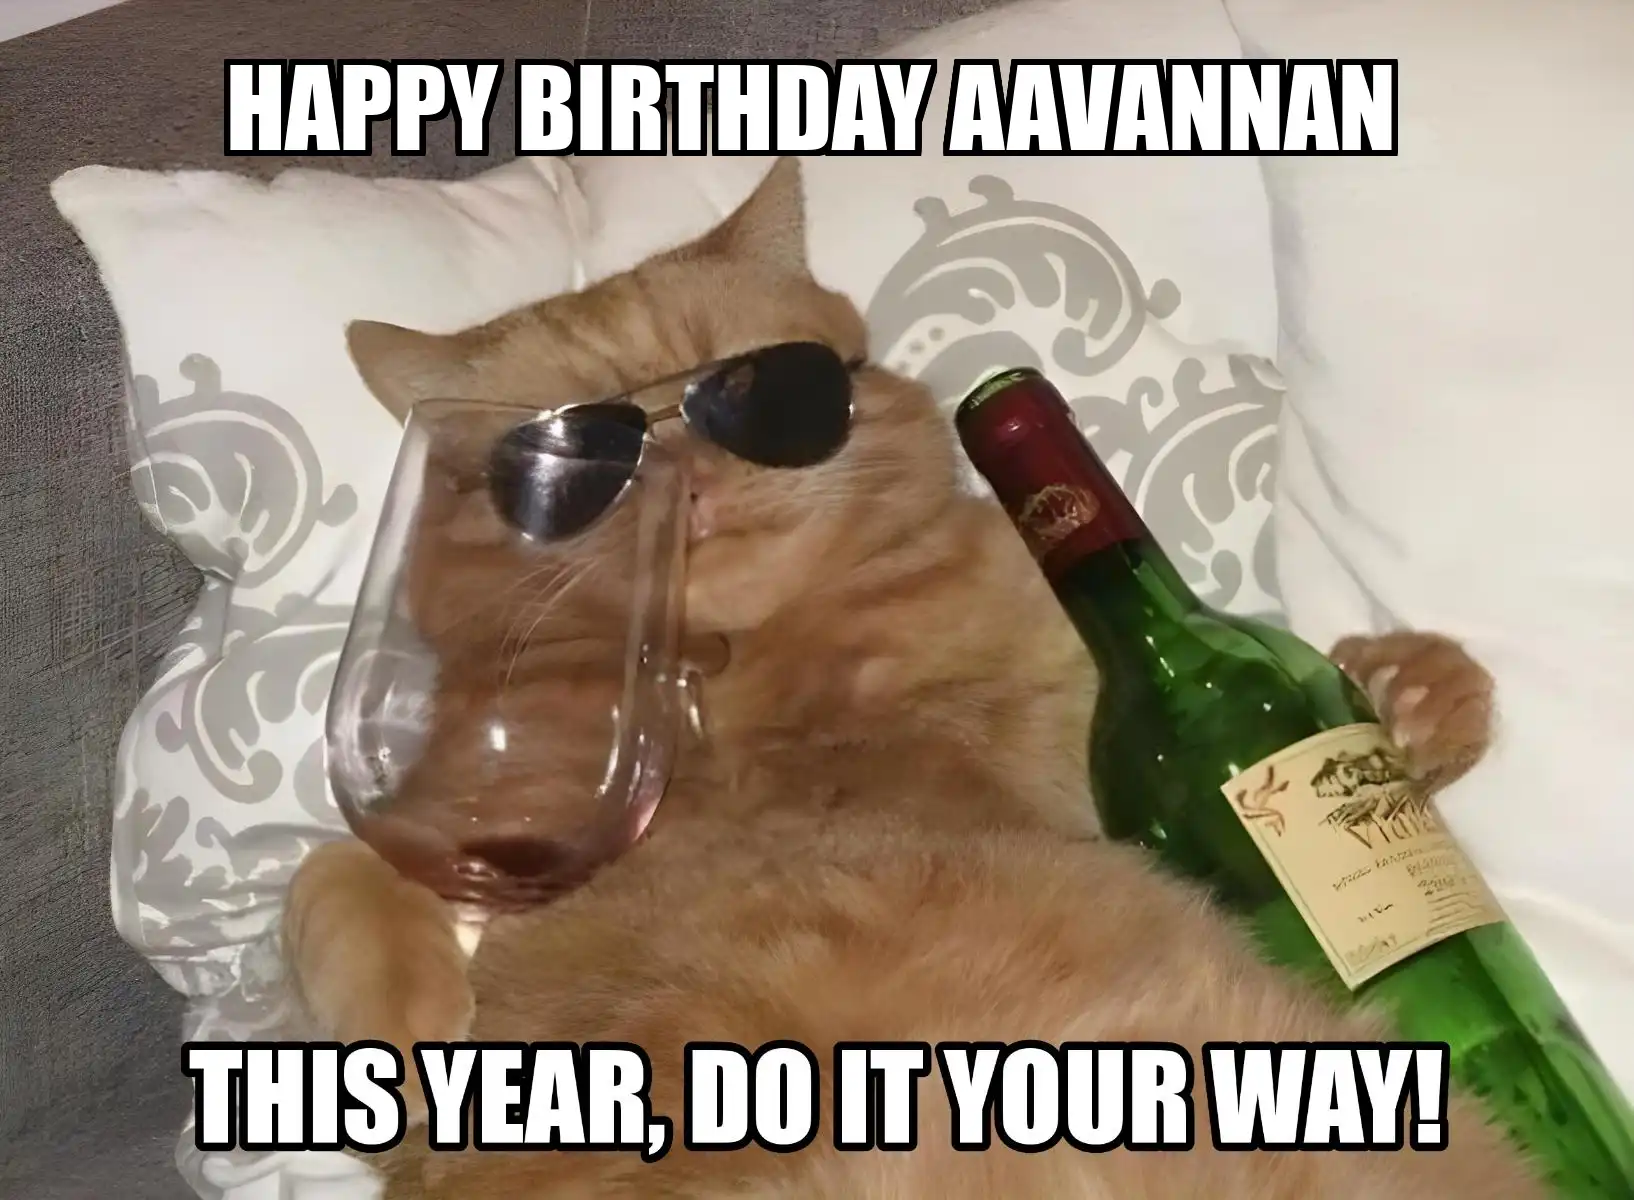 Happy Birthday Aavannan This Year Do It Your Way Meme